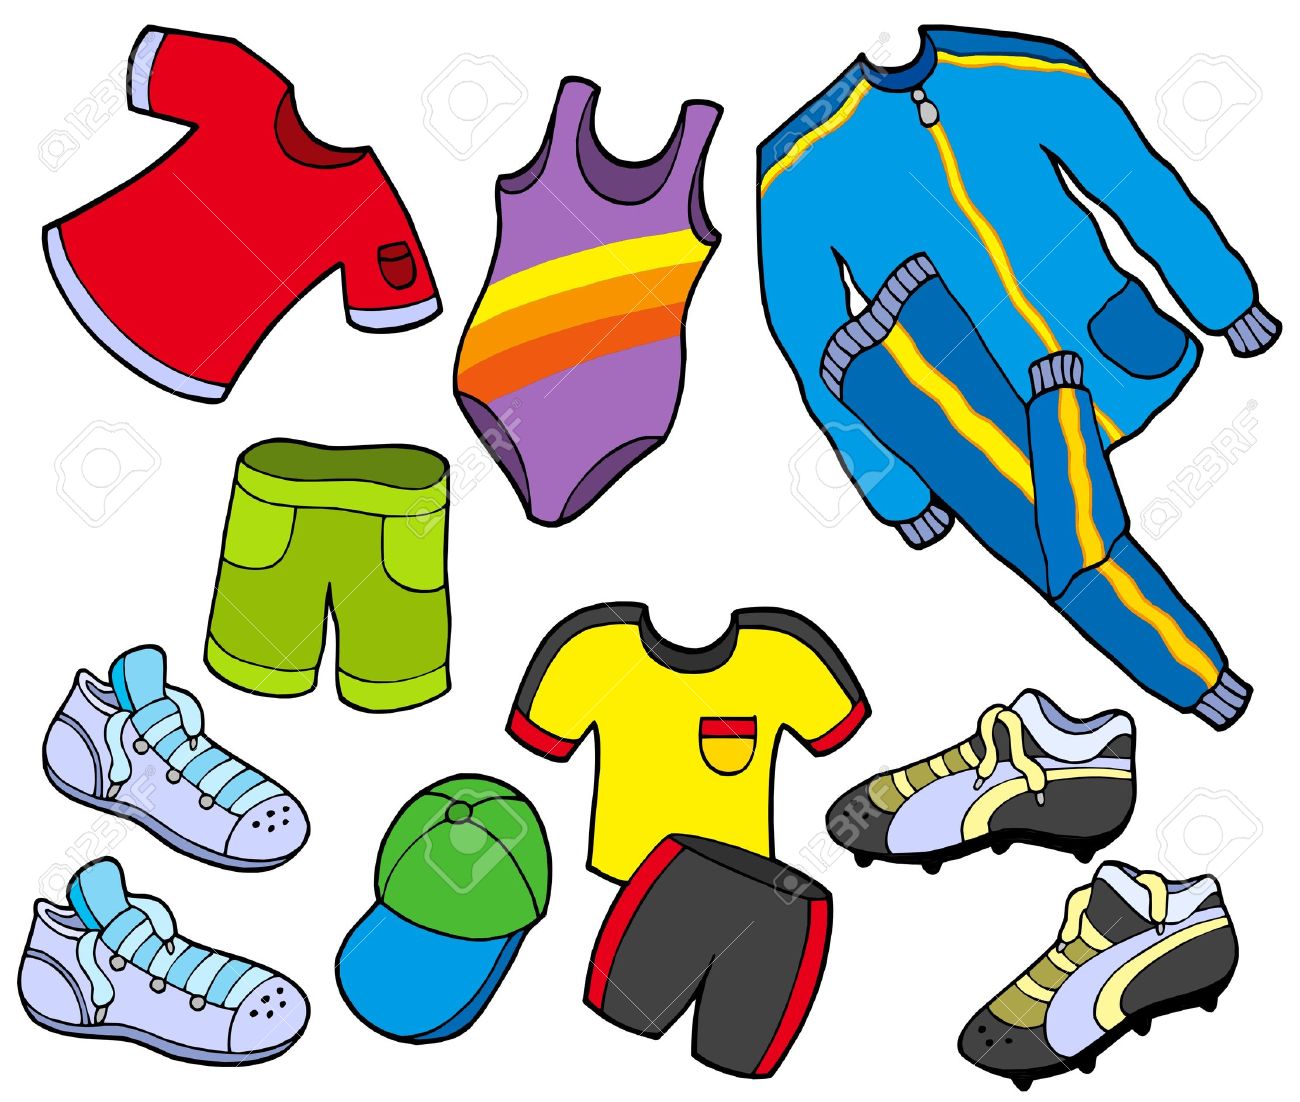 Sport boy. Clothing and sport